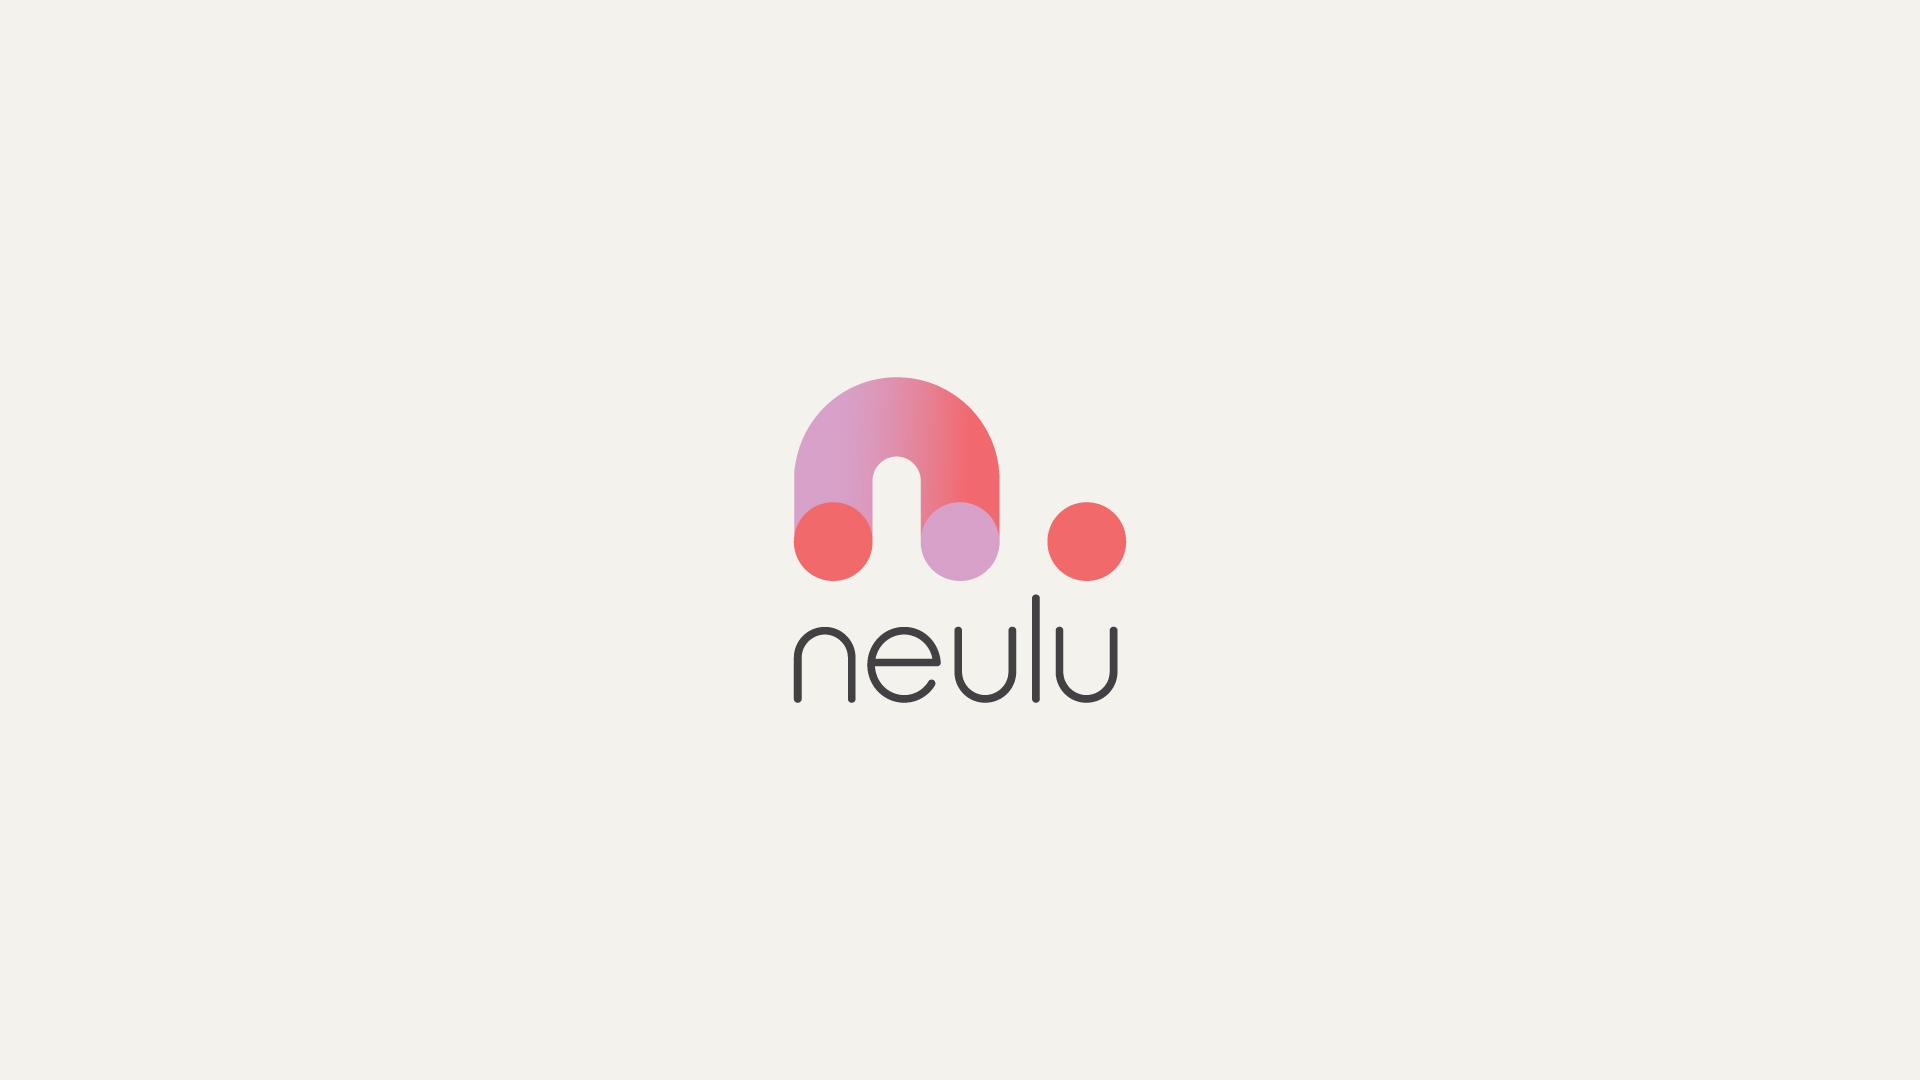 Neulu logo centered with a beige background